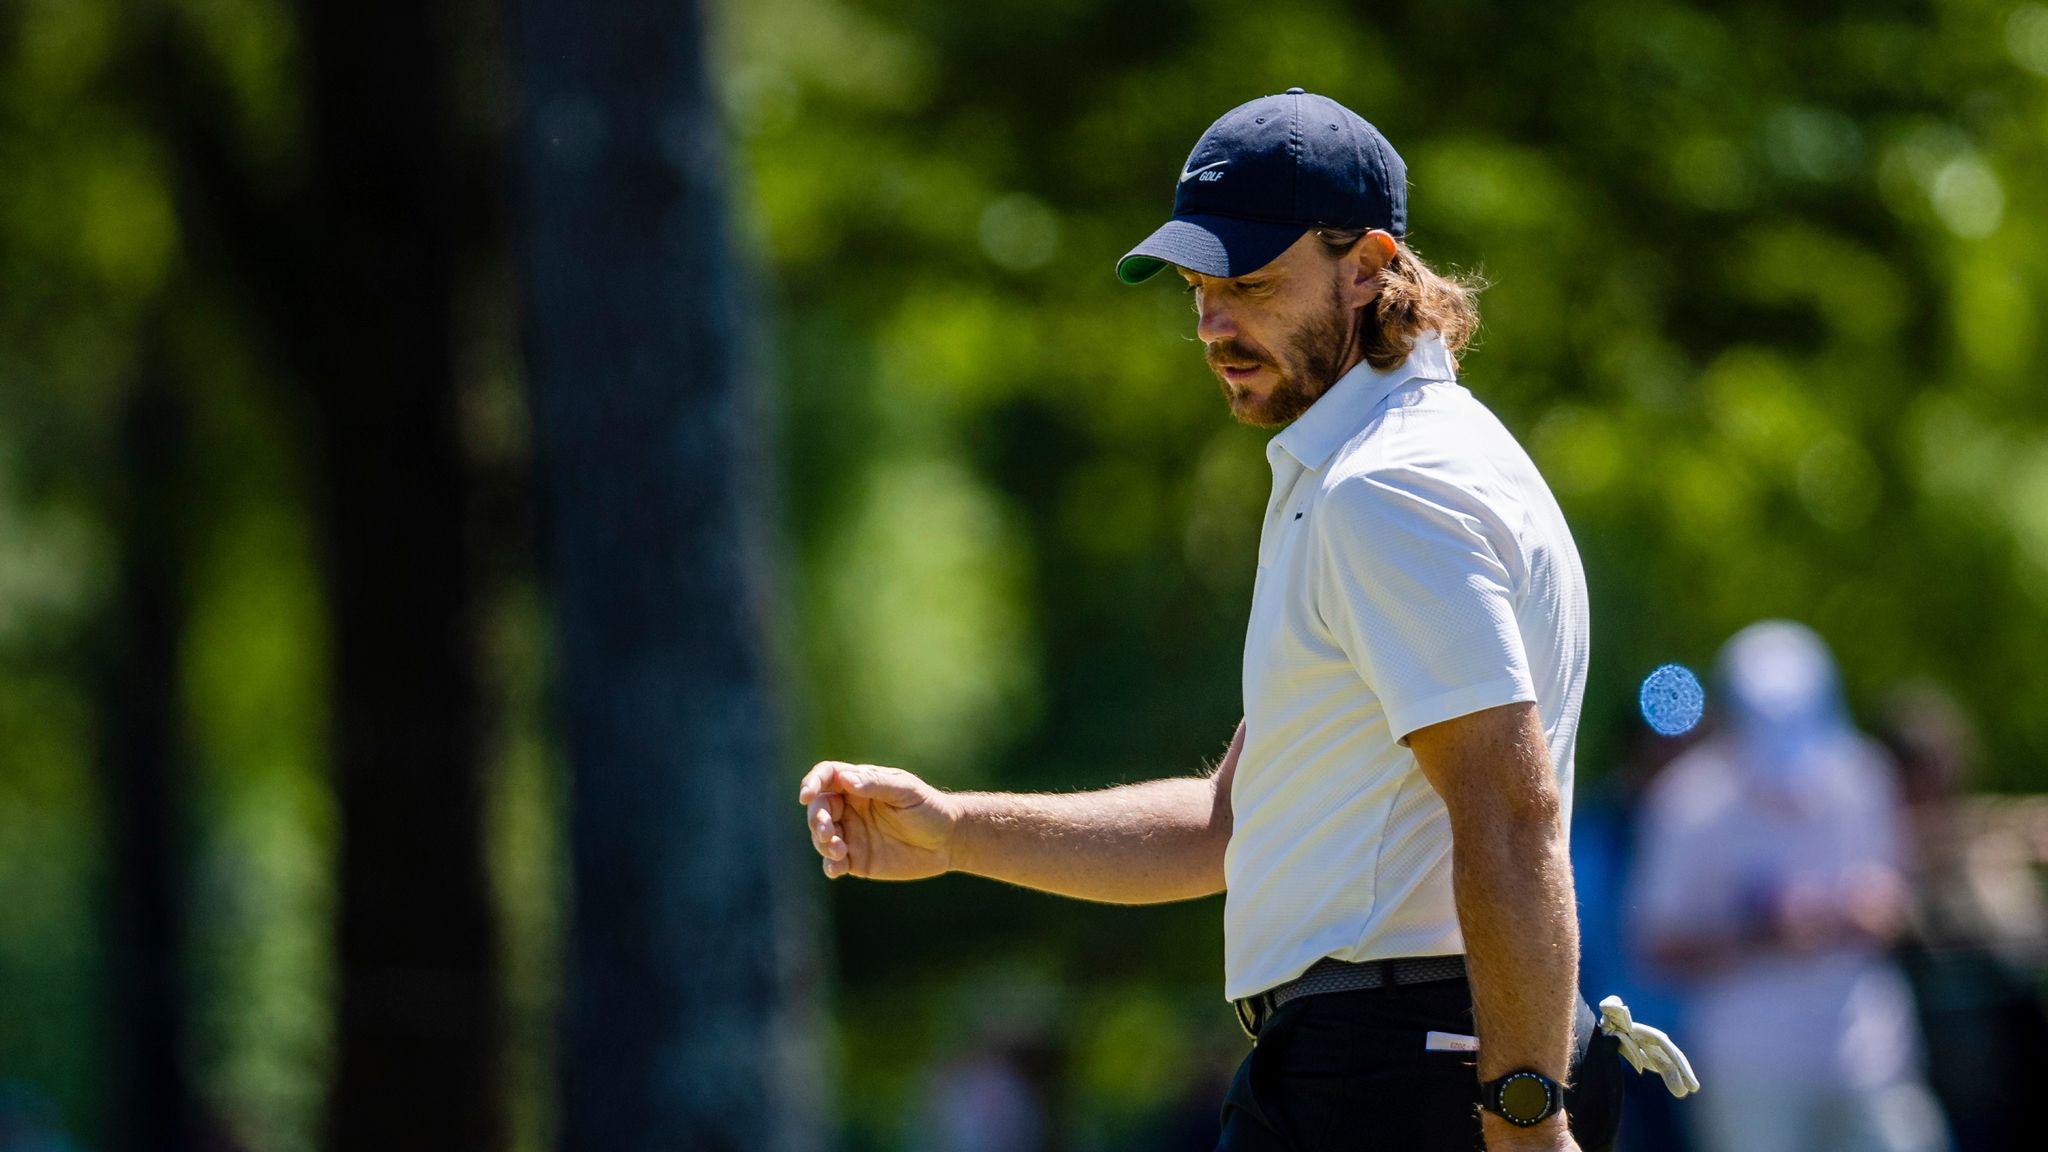 PGA Tour Tommy Fleetwood ahead at Wells Fargo Championship with Rory McIlroy in contention Golf News Sky Sports